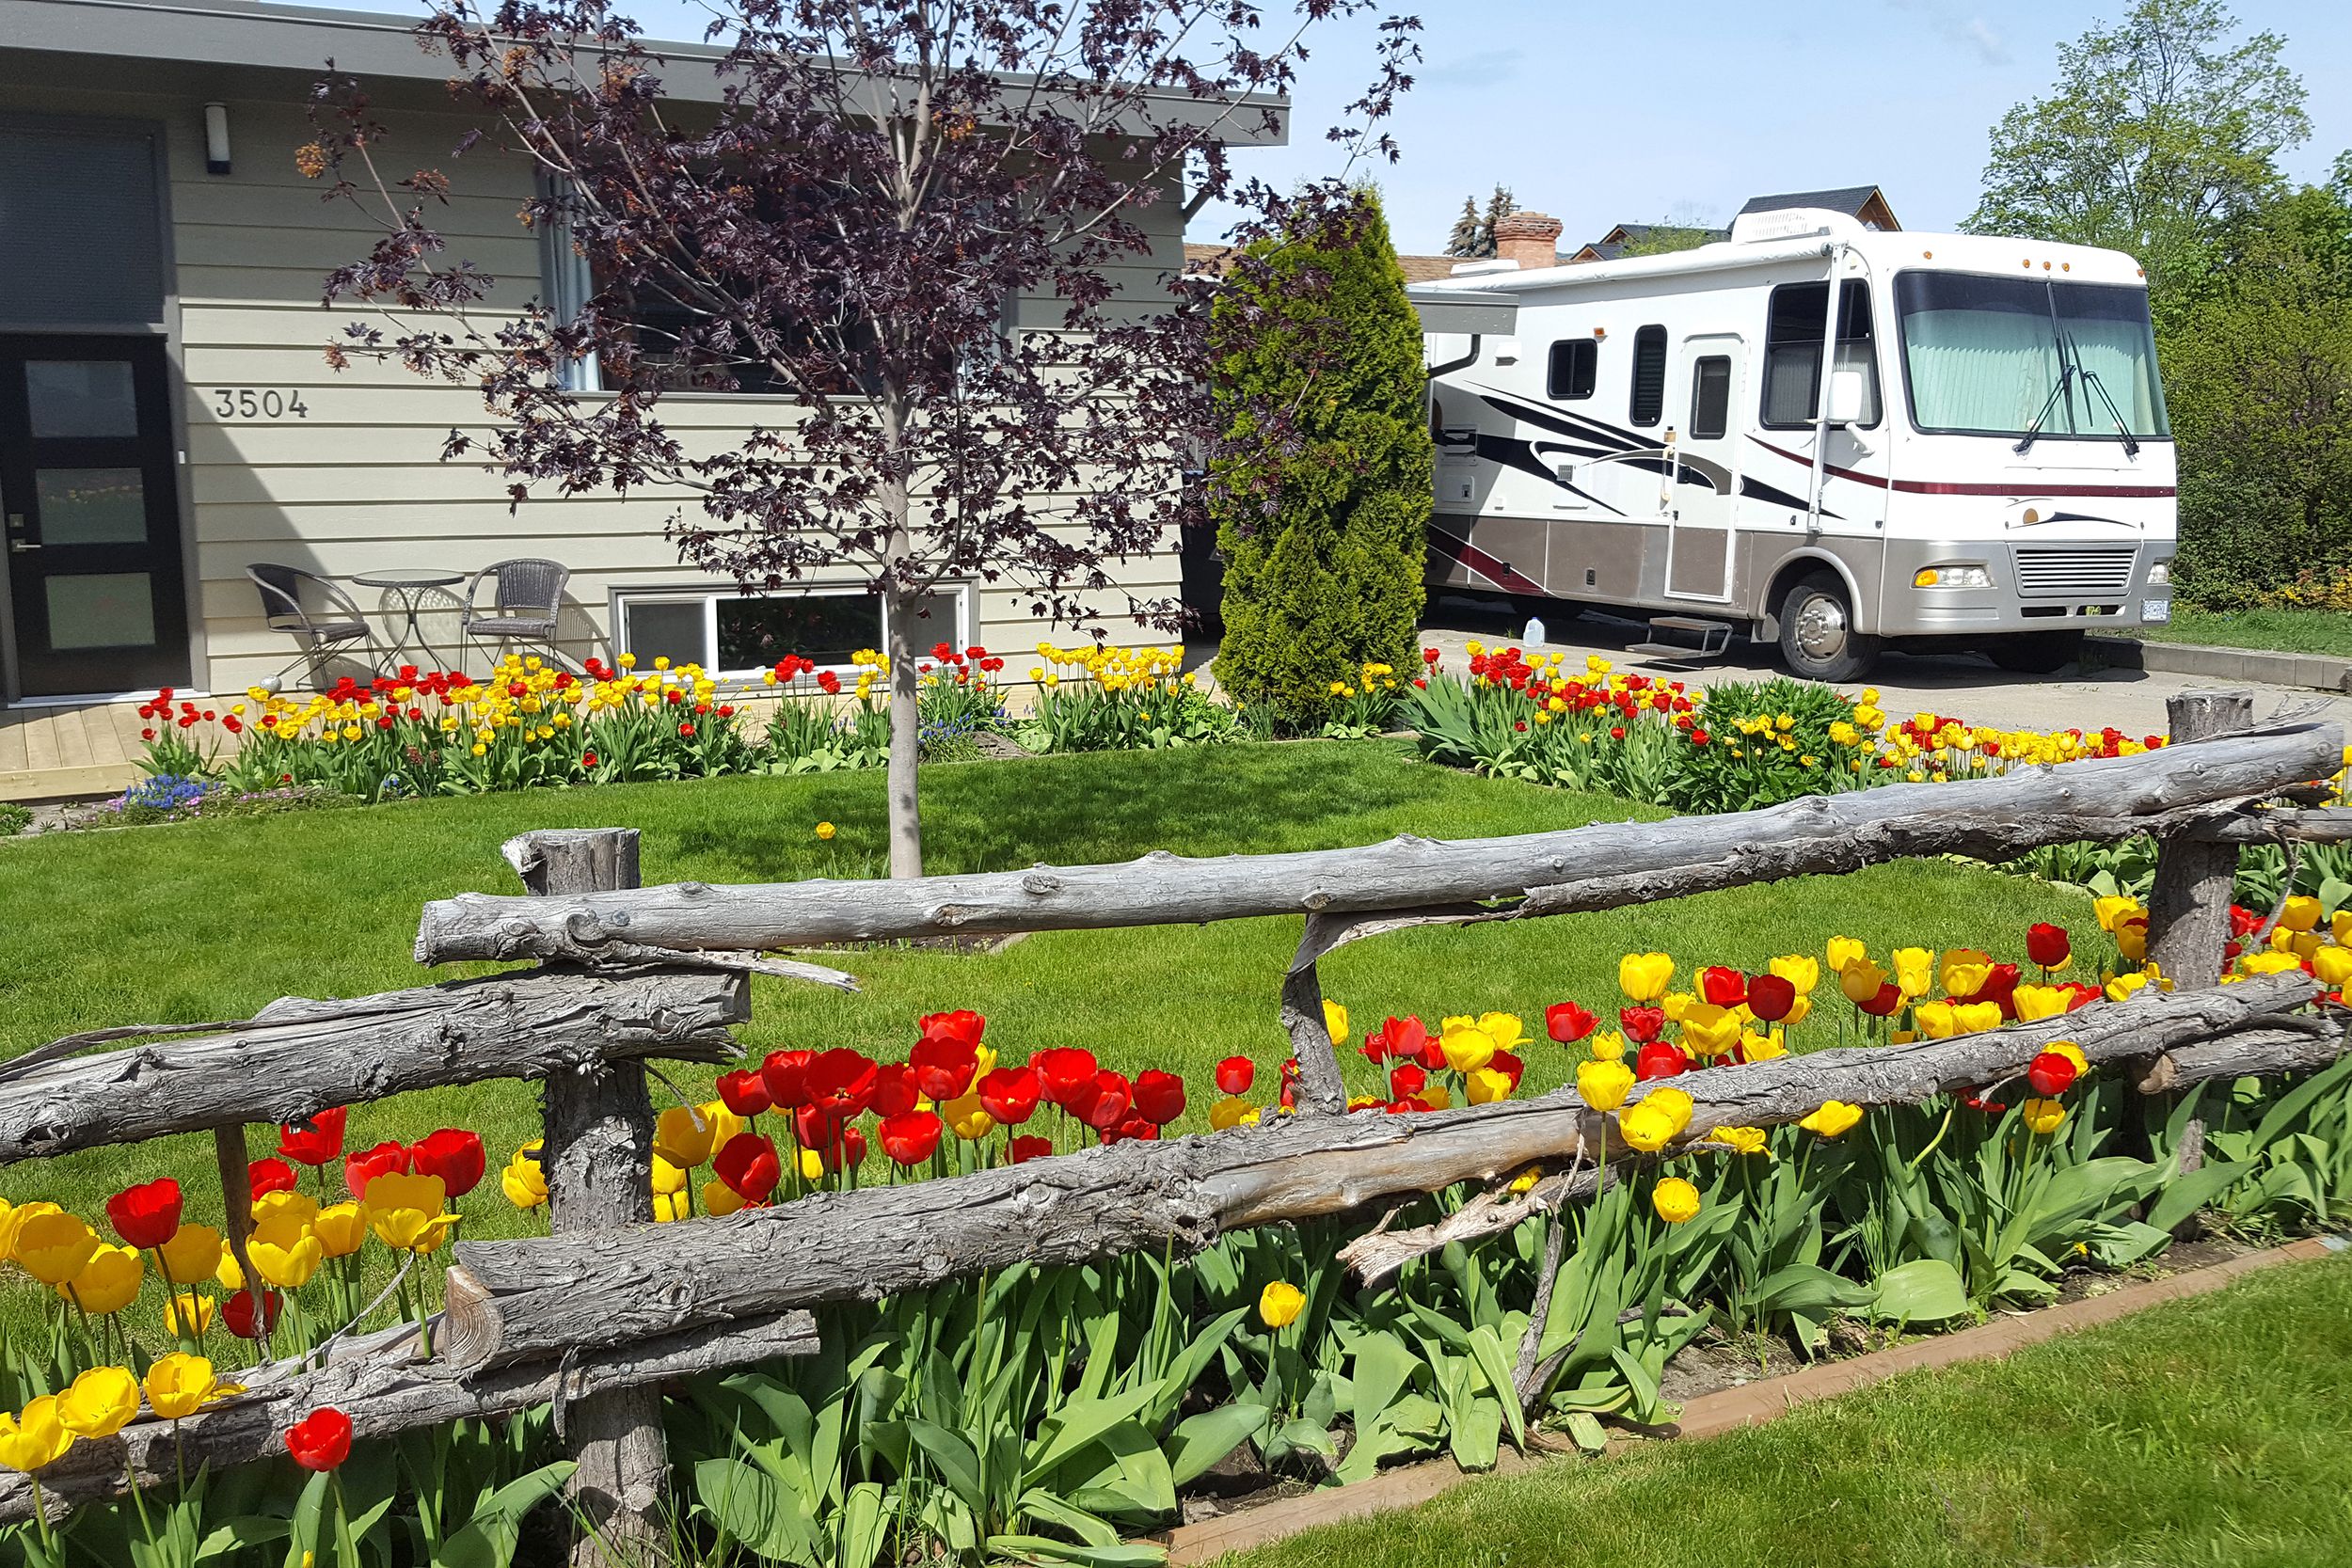 <div class="rich-text"><p>If you're not a full-time RVer, now is not the time to plan or embark on any trips, says Angela Neylon, who RVs full-time with her husband, Bill, and their dogs Henry and Cailin. "My father-in-law heard about people renting RVs to leave a bigger city to go quarantine at parks in Arizona and Nevada. If you are not a full-time RVer, I do not recommend doing this," Neylon notes. "I understand the appeal. If you travel in an RV, it's pretty easy to stay isolated on the road. However, with spots at parks being so limited right now, those spots need to be saved for full-timers." </p></div>